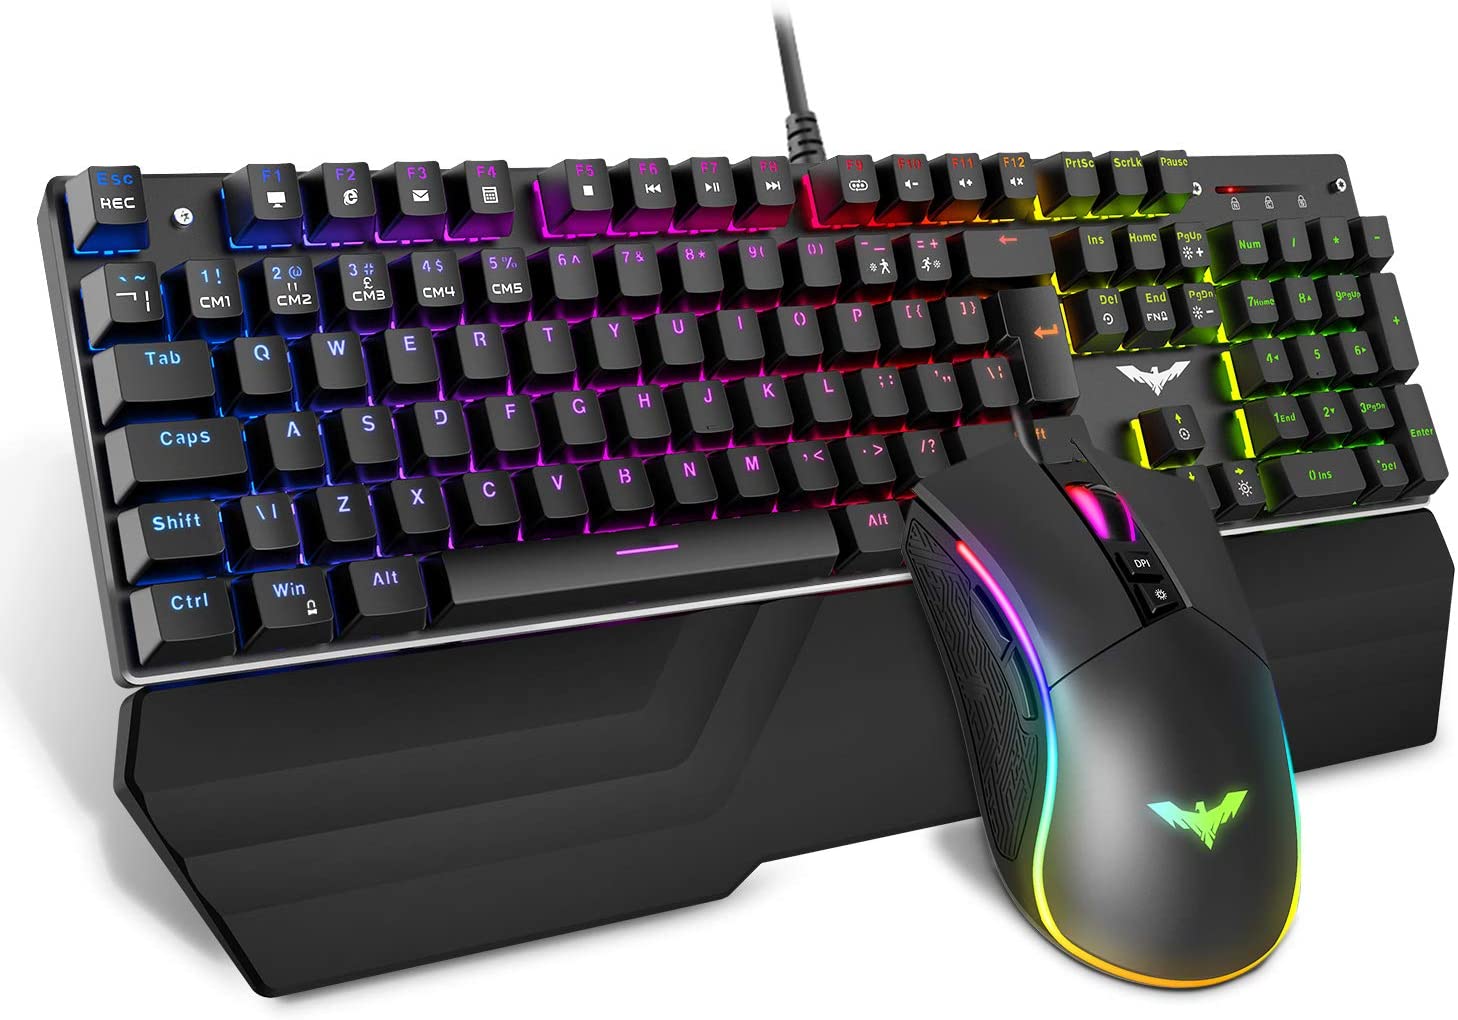 havit Wired RGB Mechanical Gaming Keyboard and Mouse Combo Set UK Layout, Blue Switch Mechanical Keyboard with Detachable Ergonomic Wrist Rest 4800Dots Per Inch Programmable Wired Mouse,Black